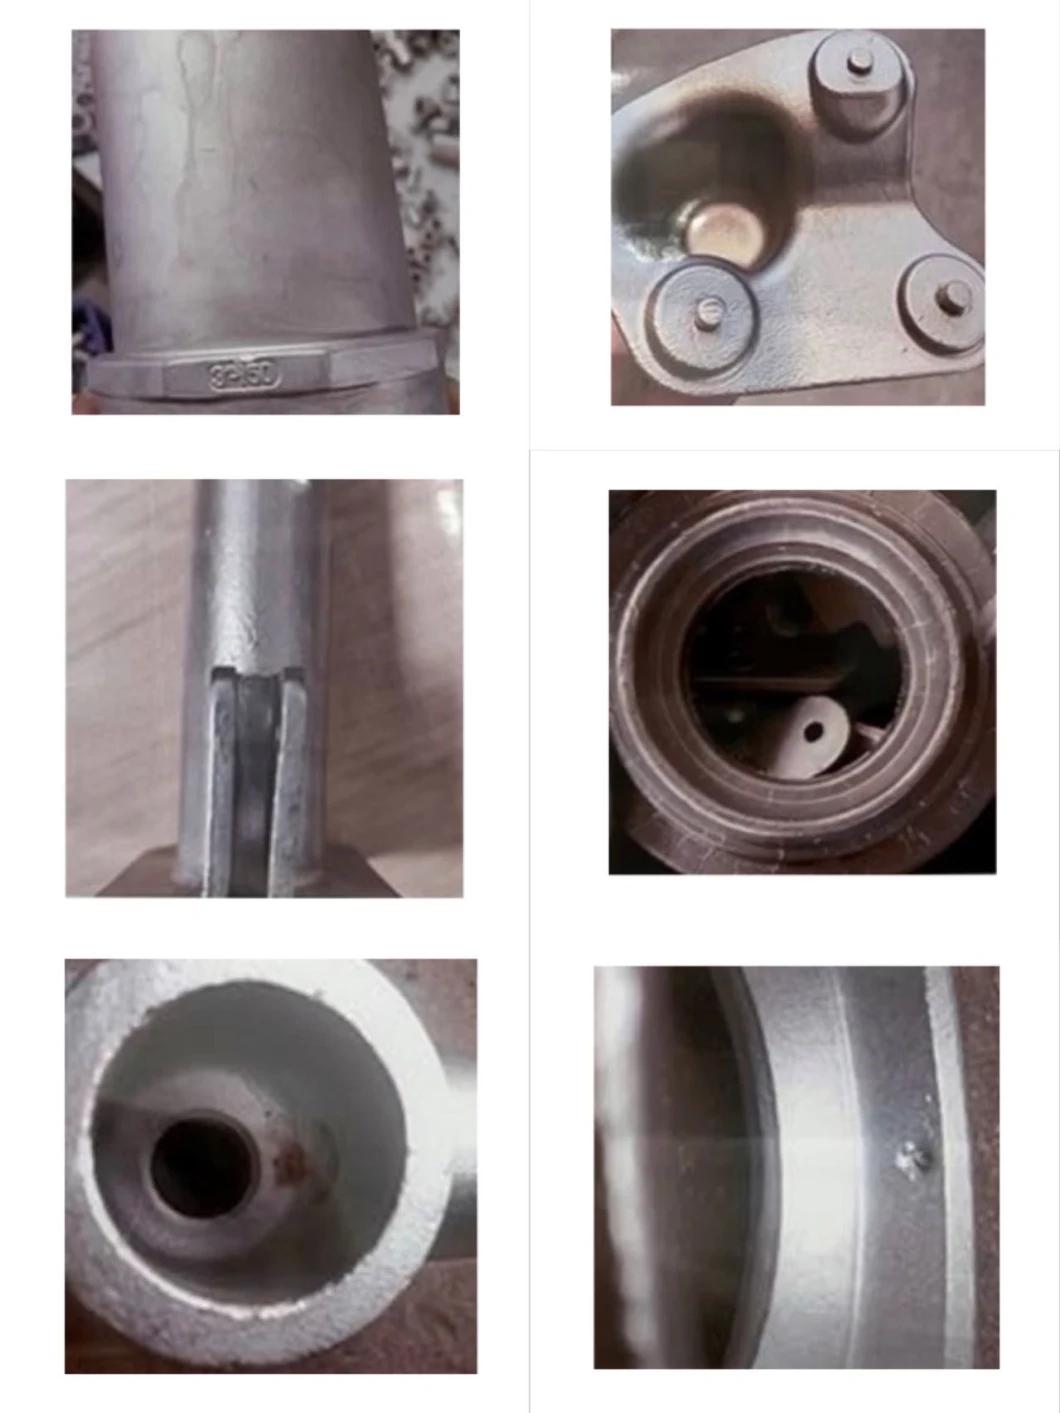 OEM Lost Wax Casting Metal Parts Stainless Steel Marine Hardware/Auto/Machinery Parts